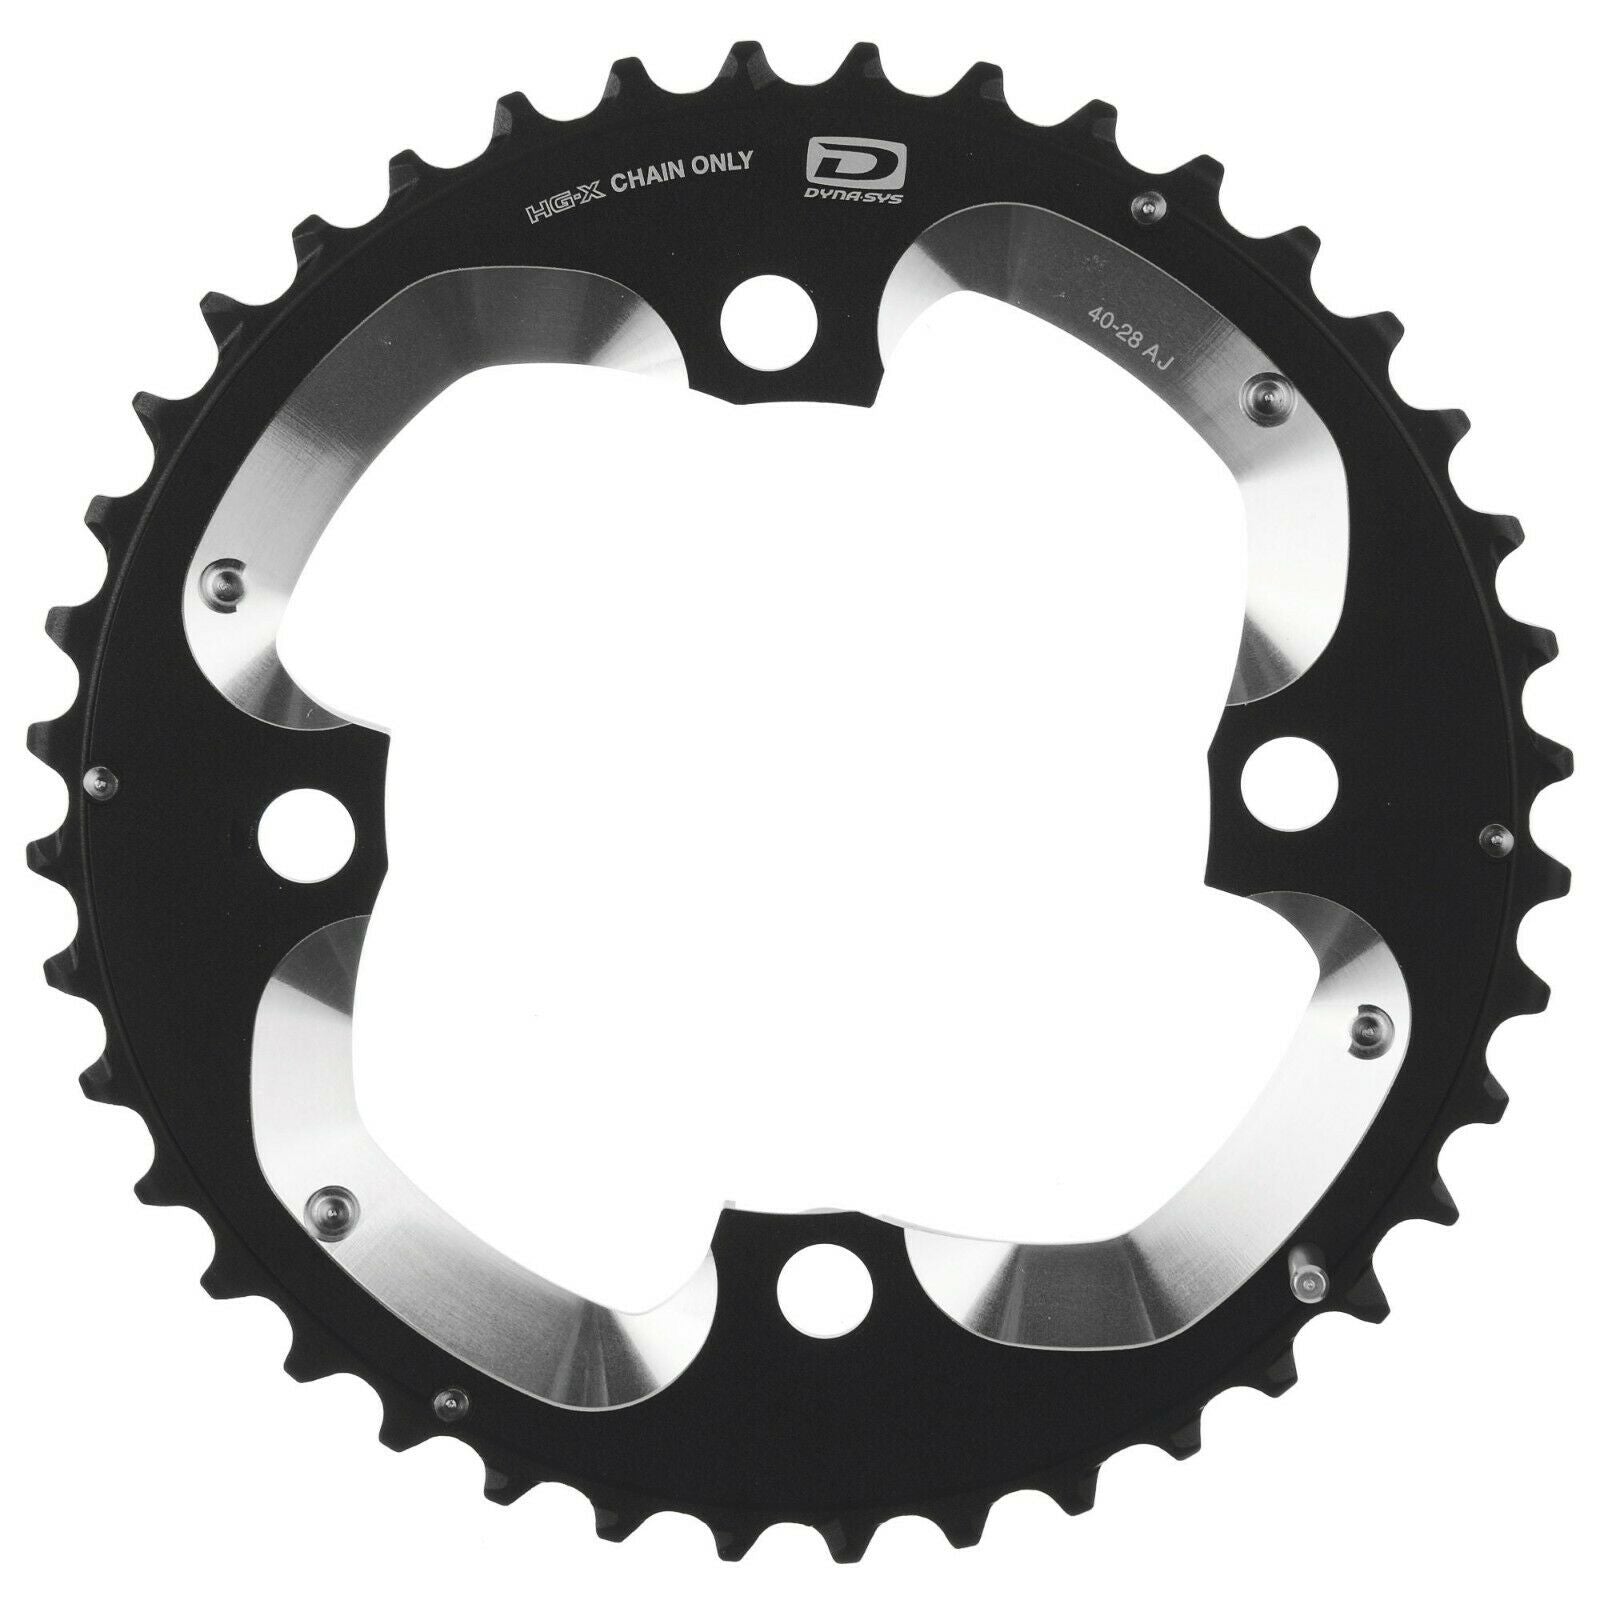 Shimano Deore XT FC-M785 10 Speed Double Chainring - 104mm BCD - Sportandleisure.com (7506693882113)